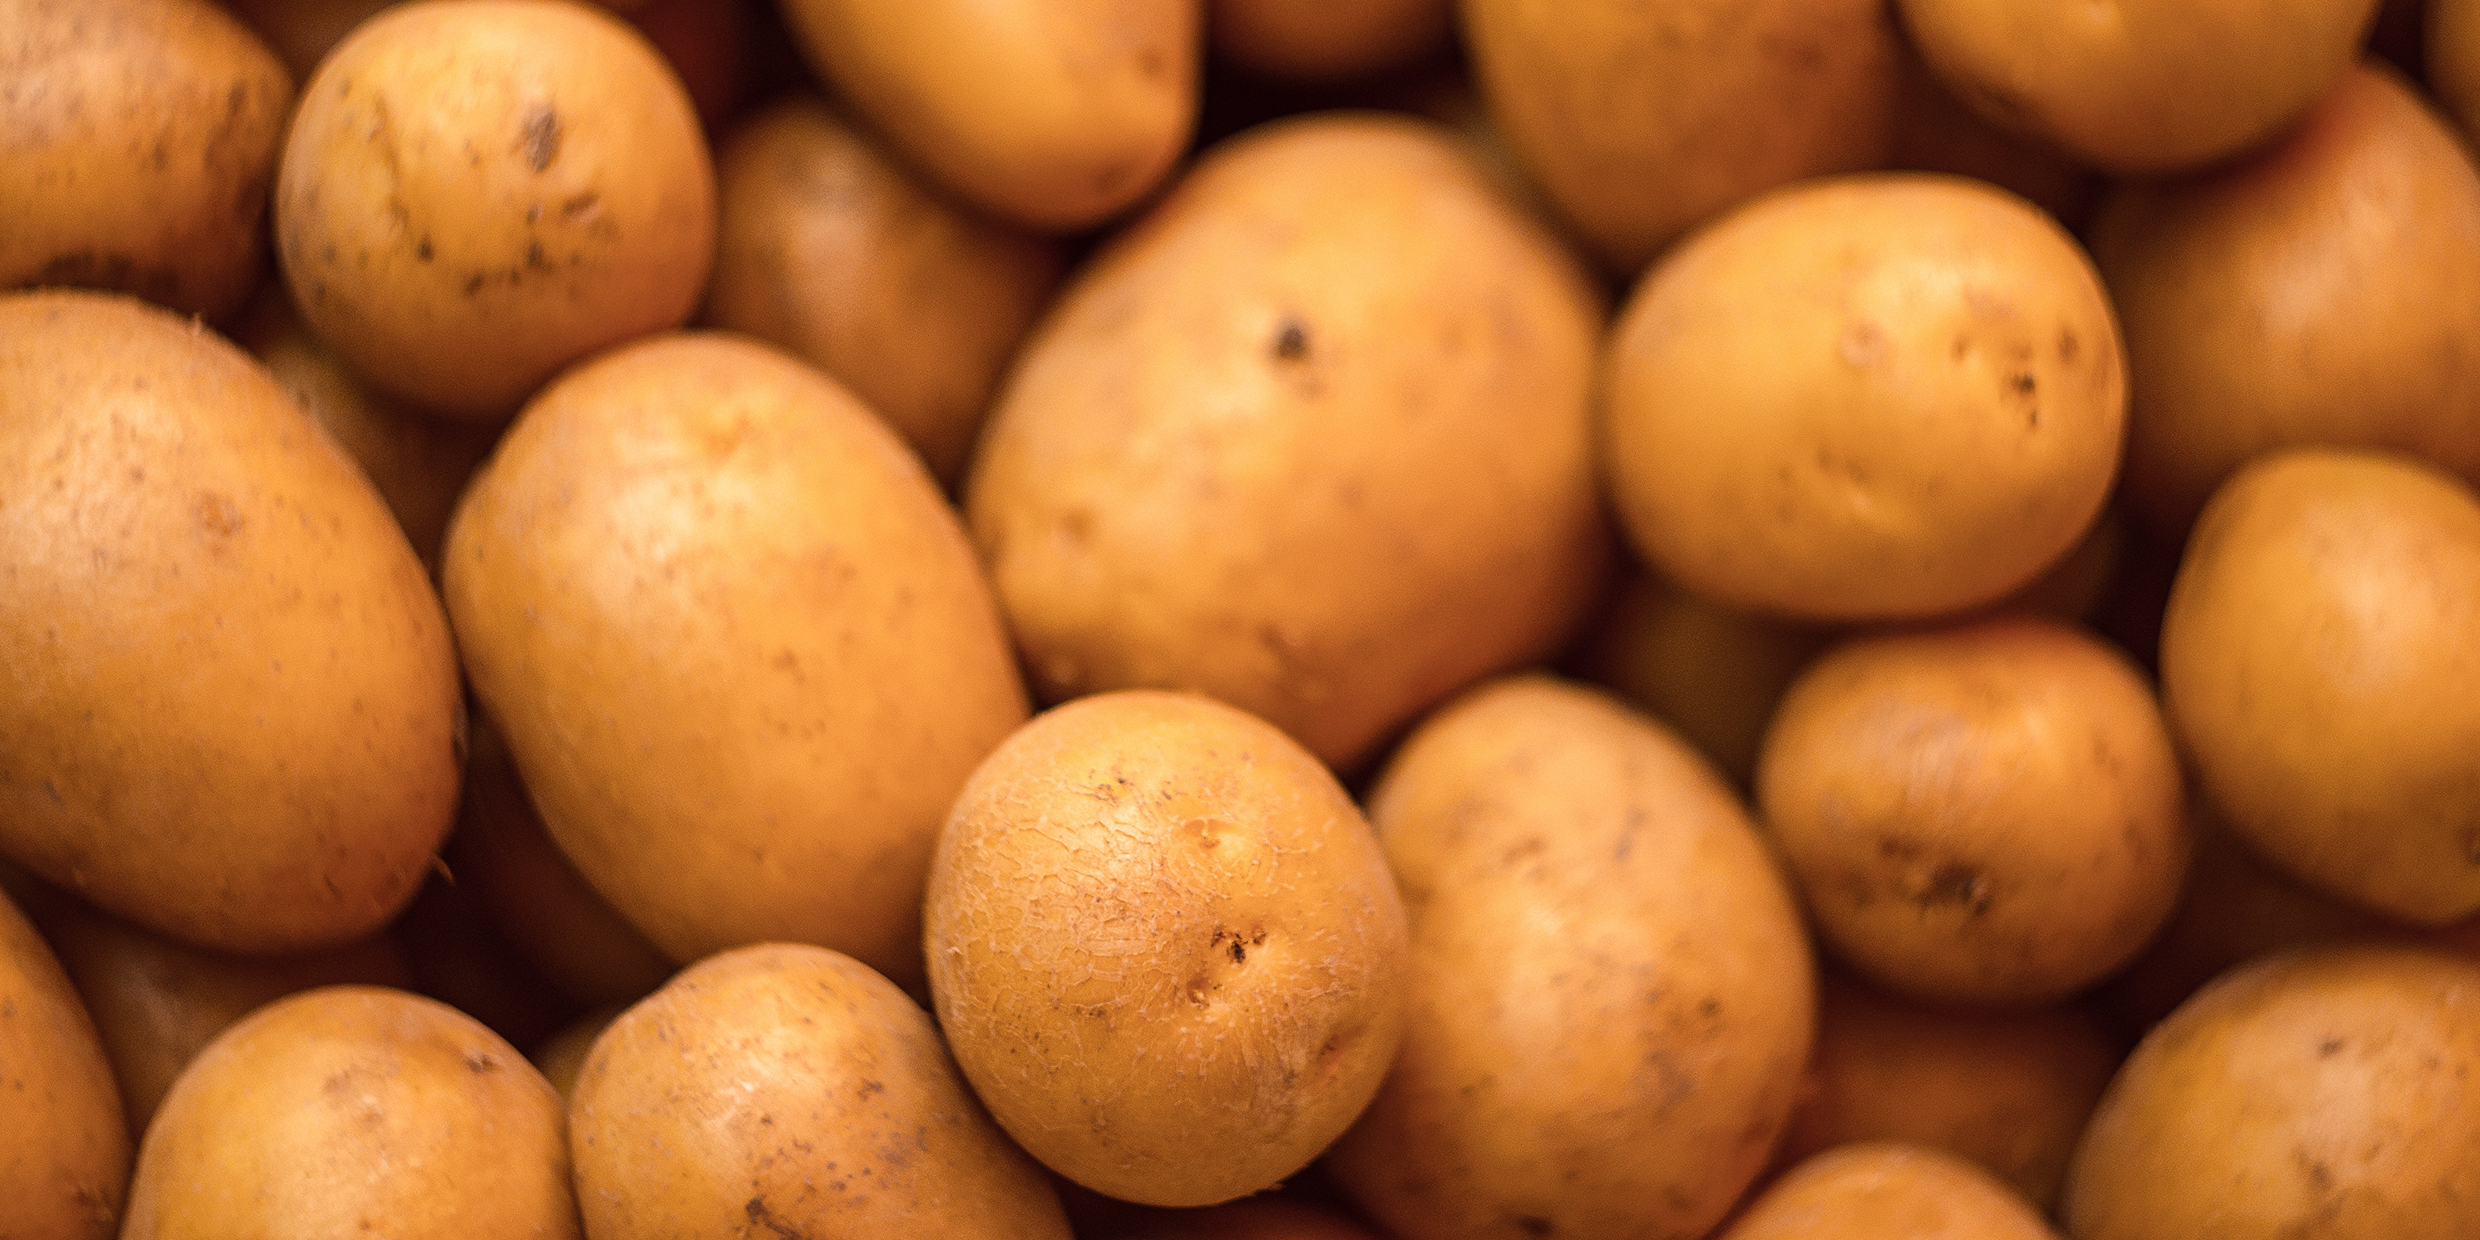 Image of a pile of potatoes